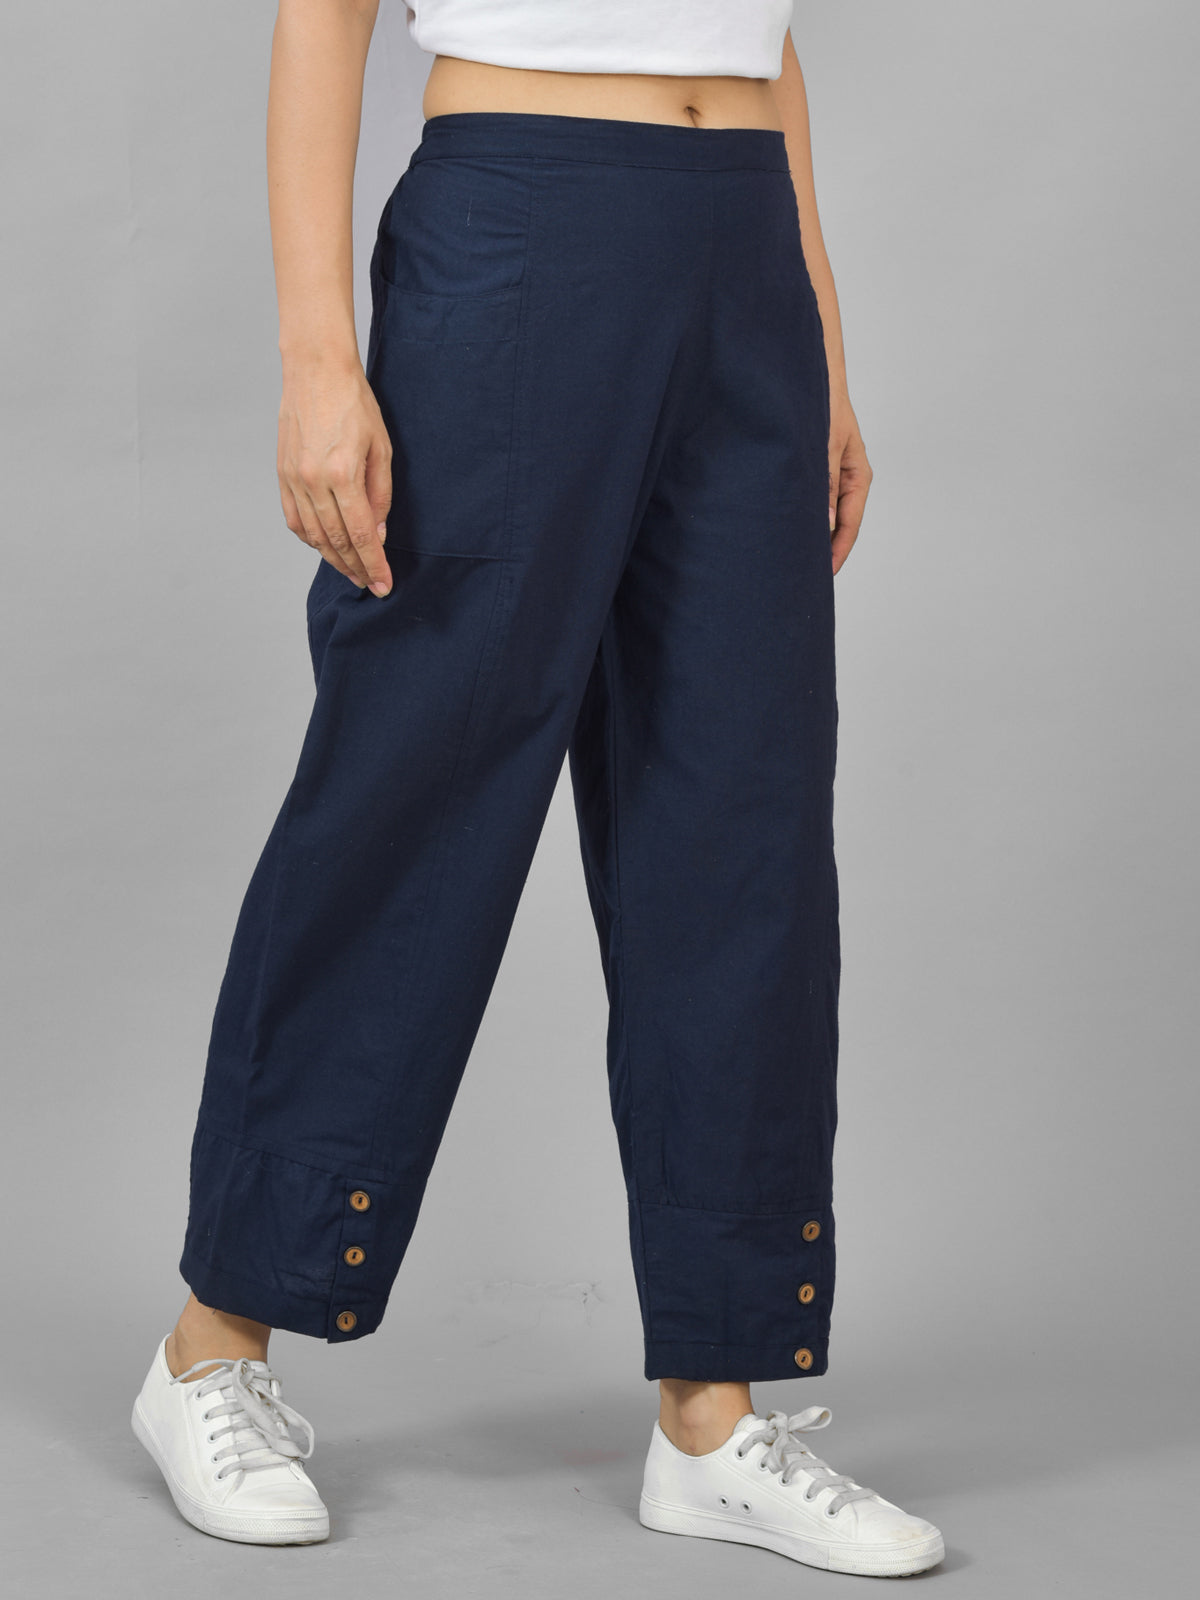 Womens Navy Blue Side Pocket Pure Cotton Straight Cargo Pant